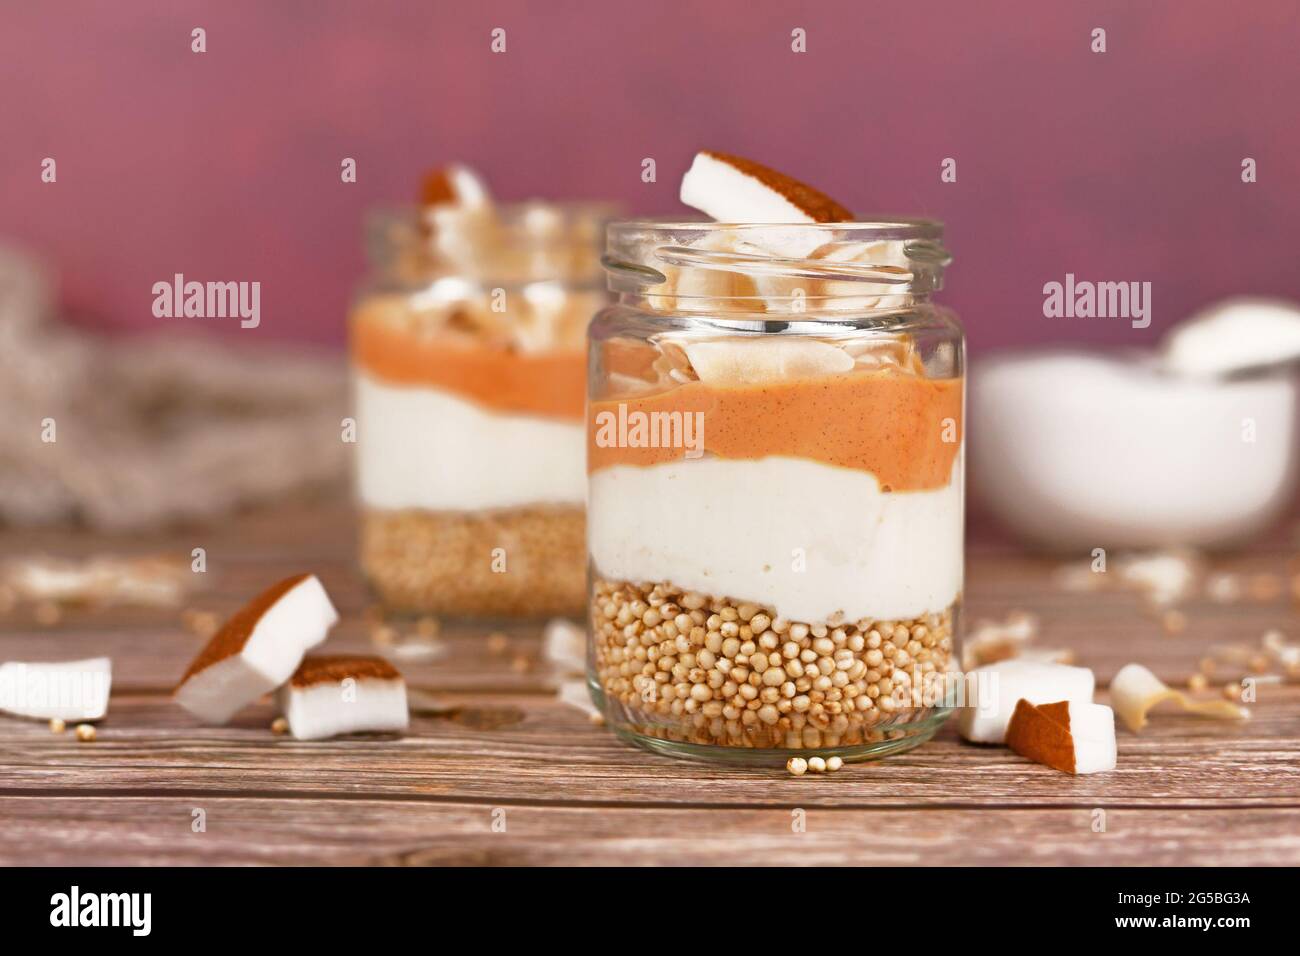 Layered breakfast or dessert with puffed quinoa grains, yogurt and coconut flakes and pieces in glass Stock Photo